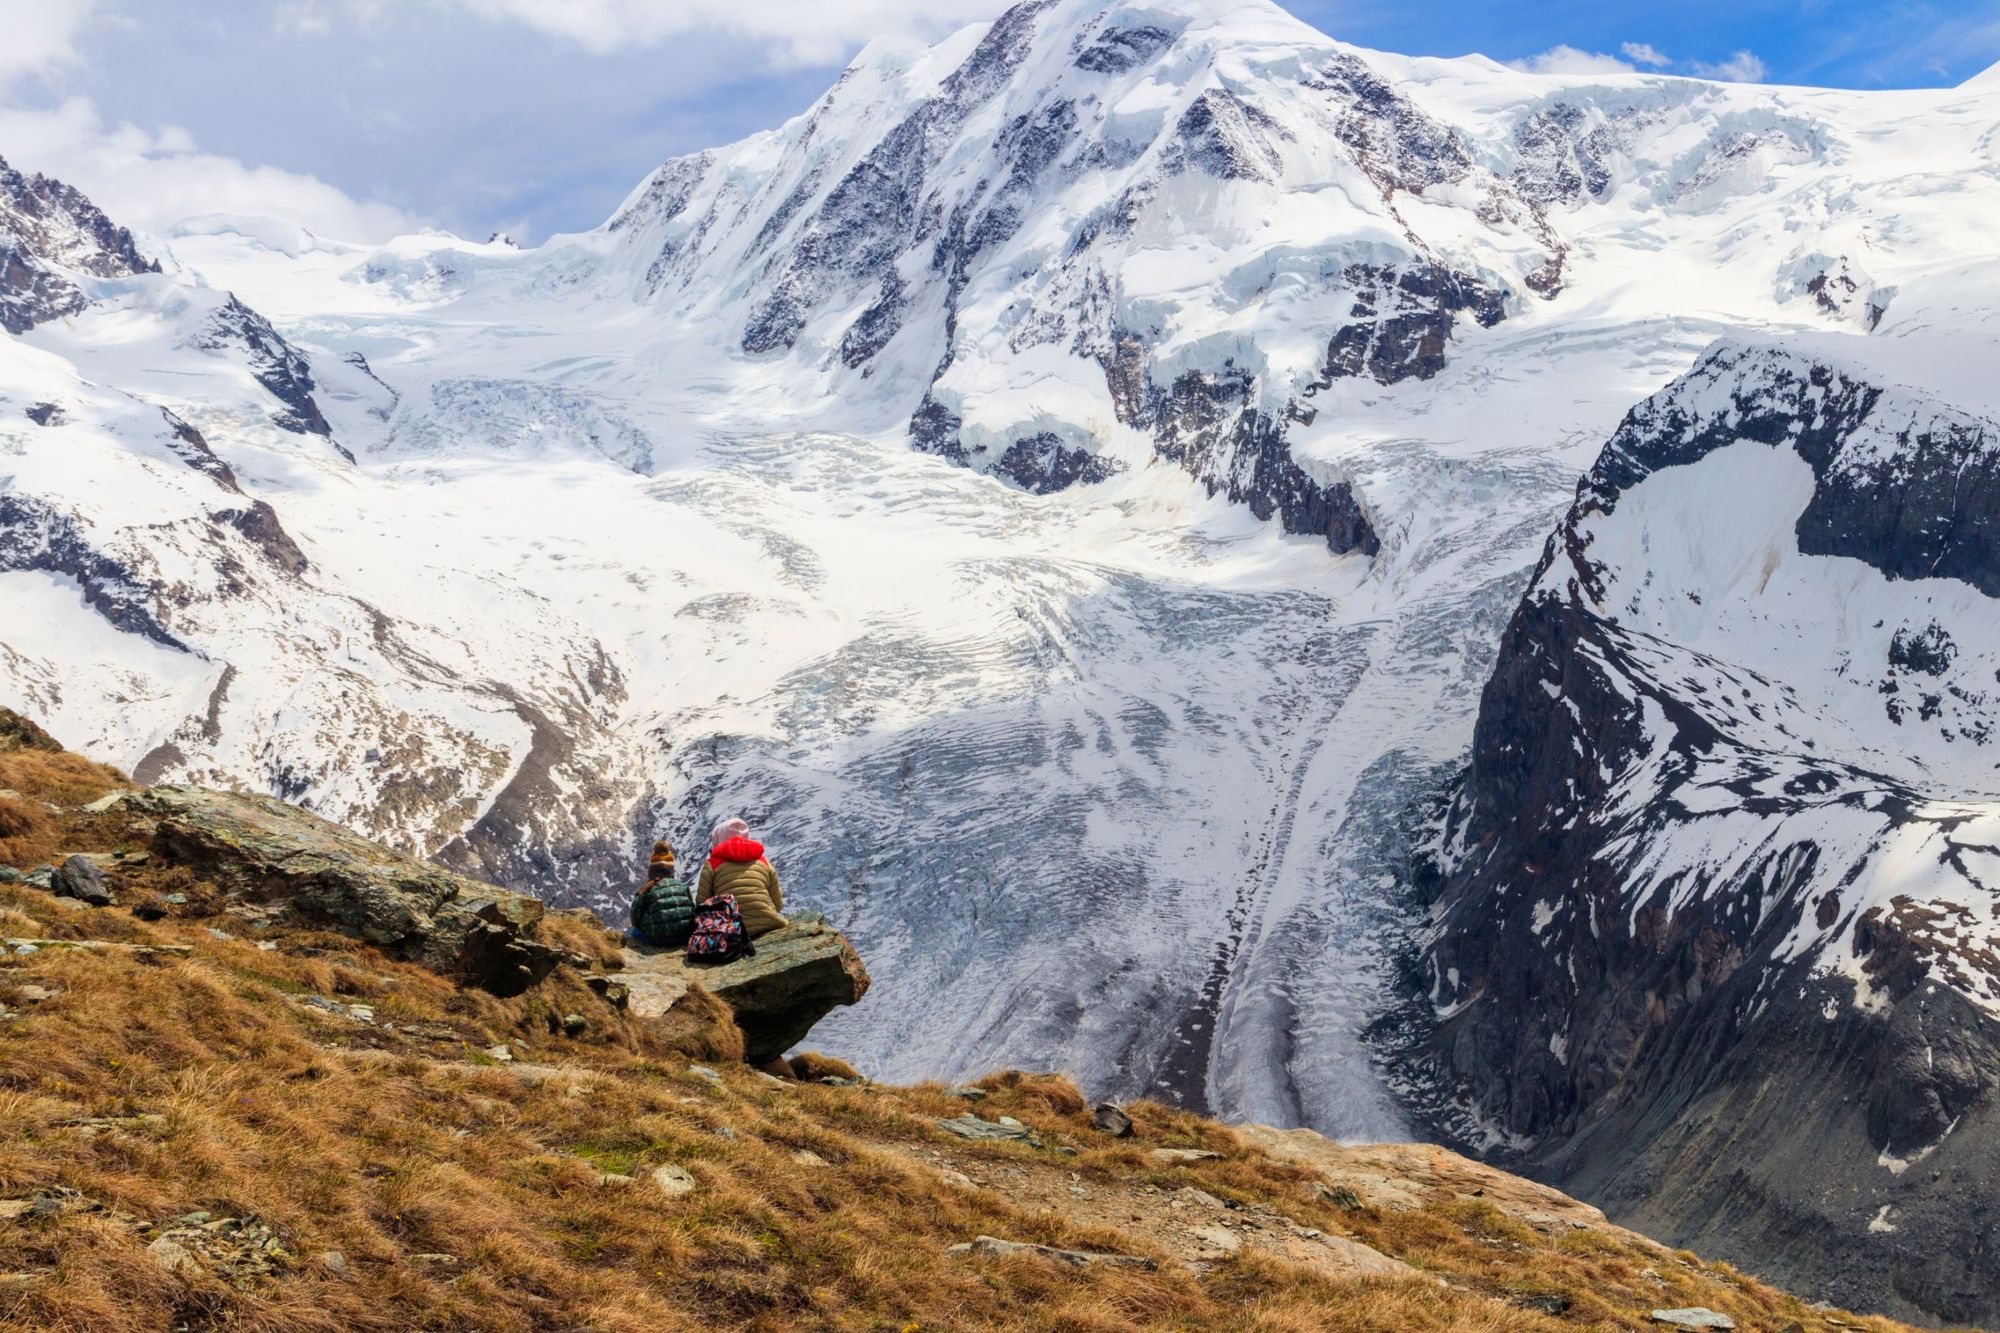 A Guide to the Tour of Monte Rosa